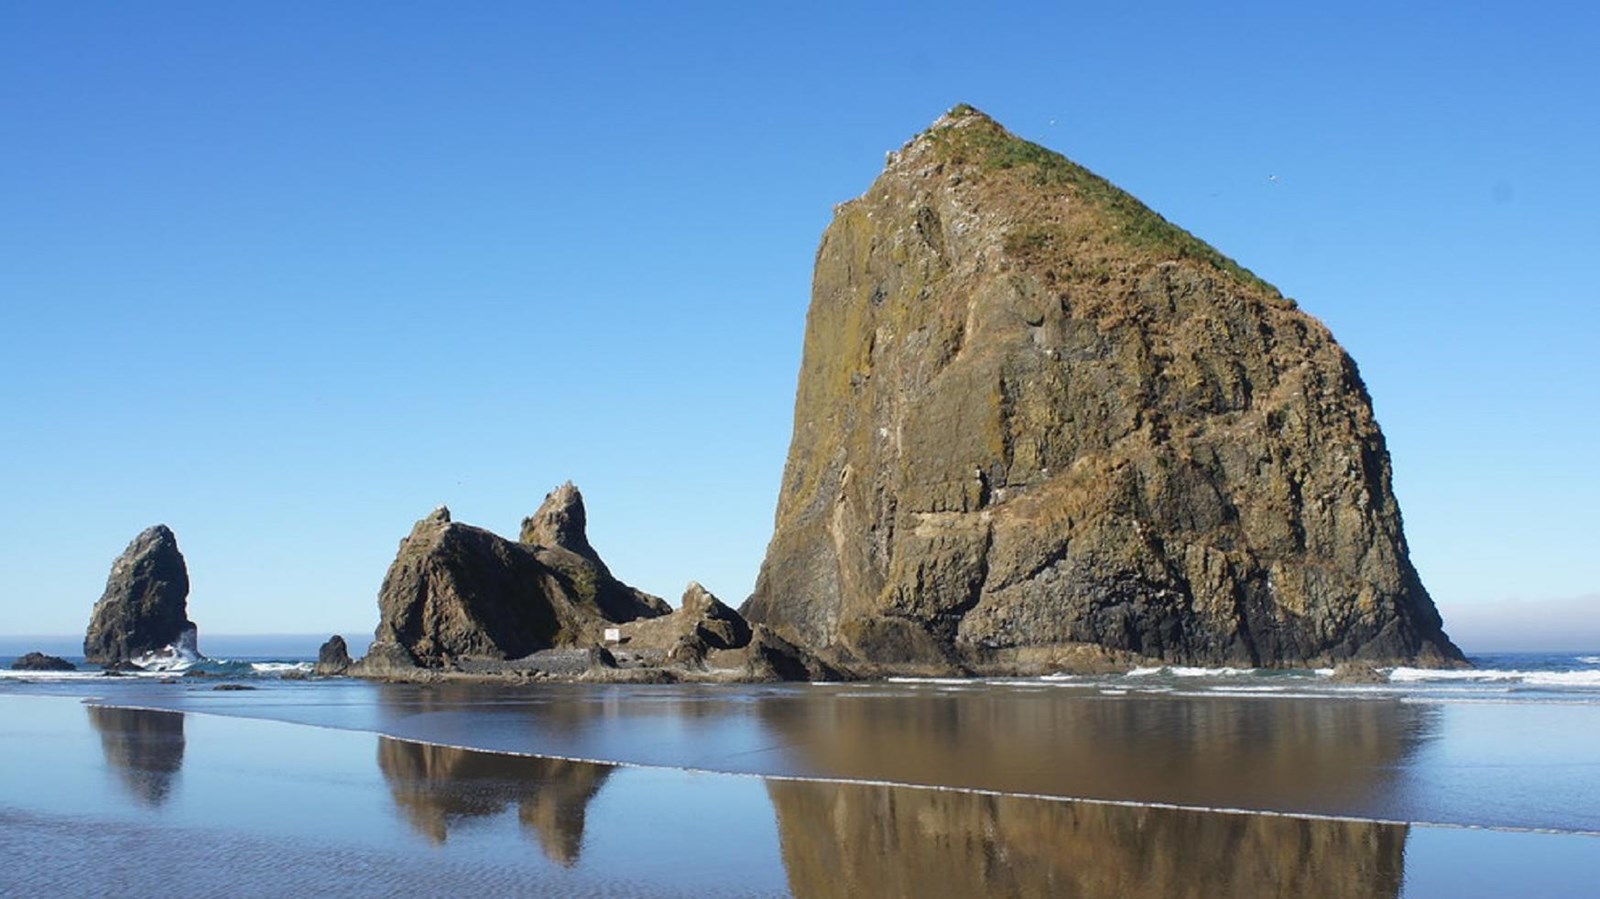 Enormous basalt rock formations rise from the shore at low tide against a blue sky